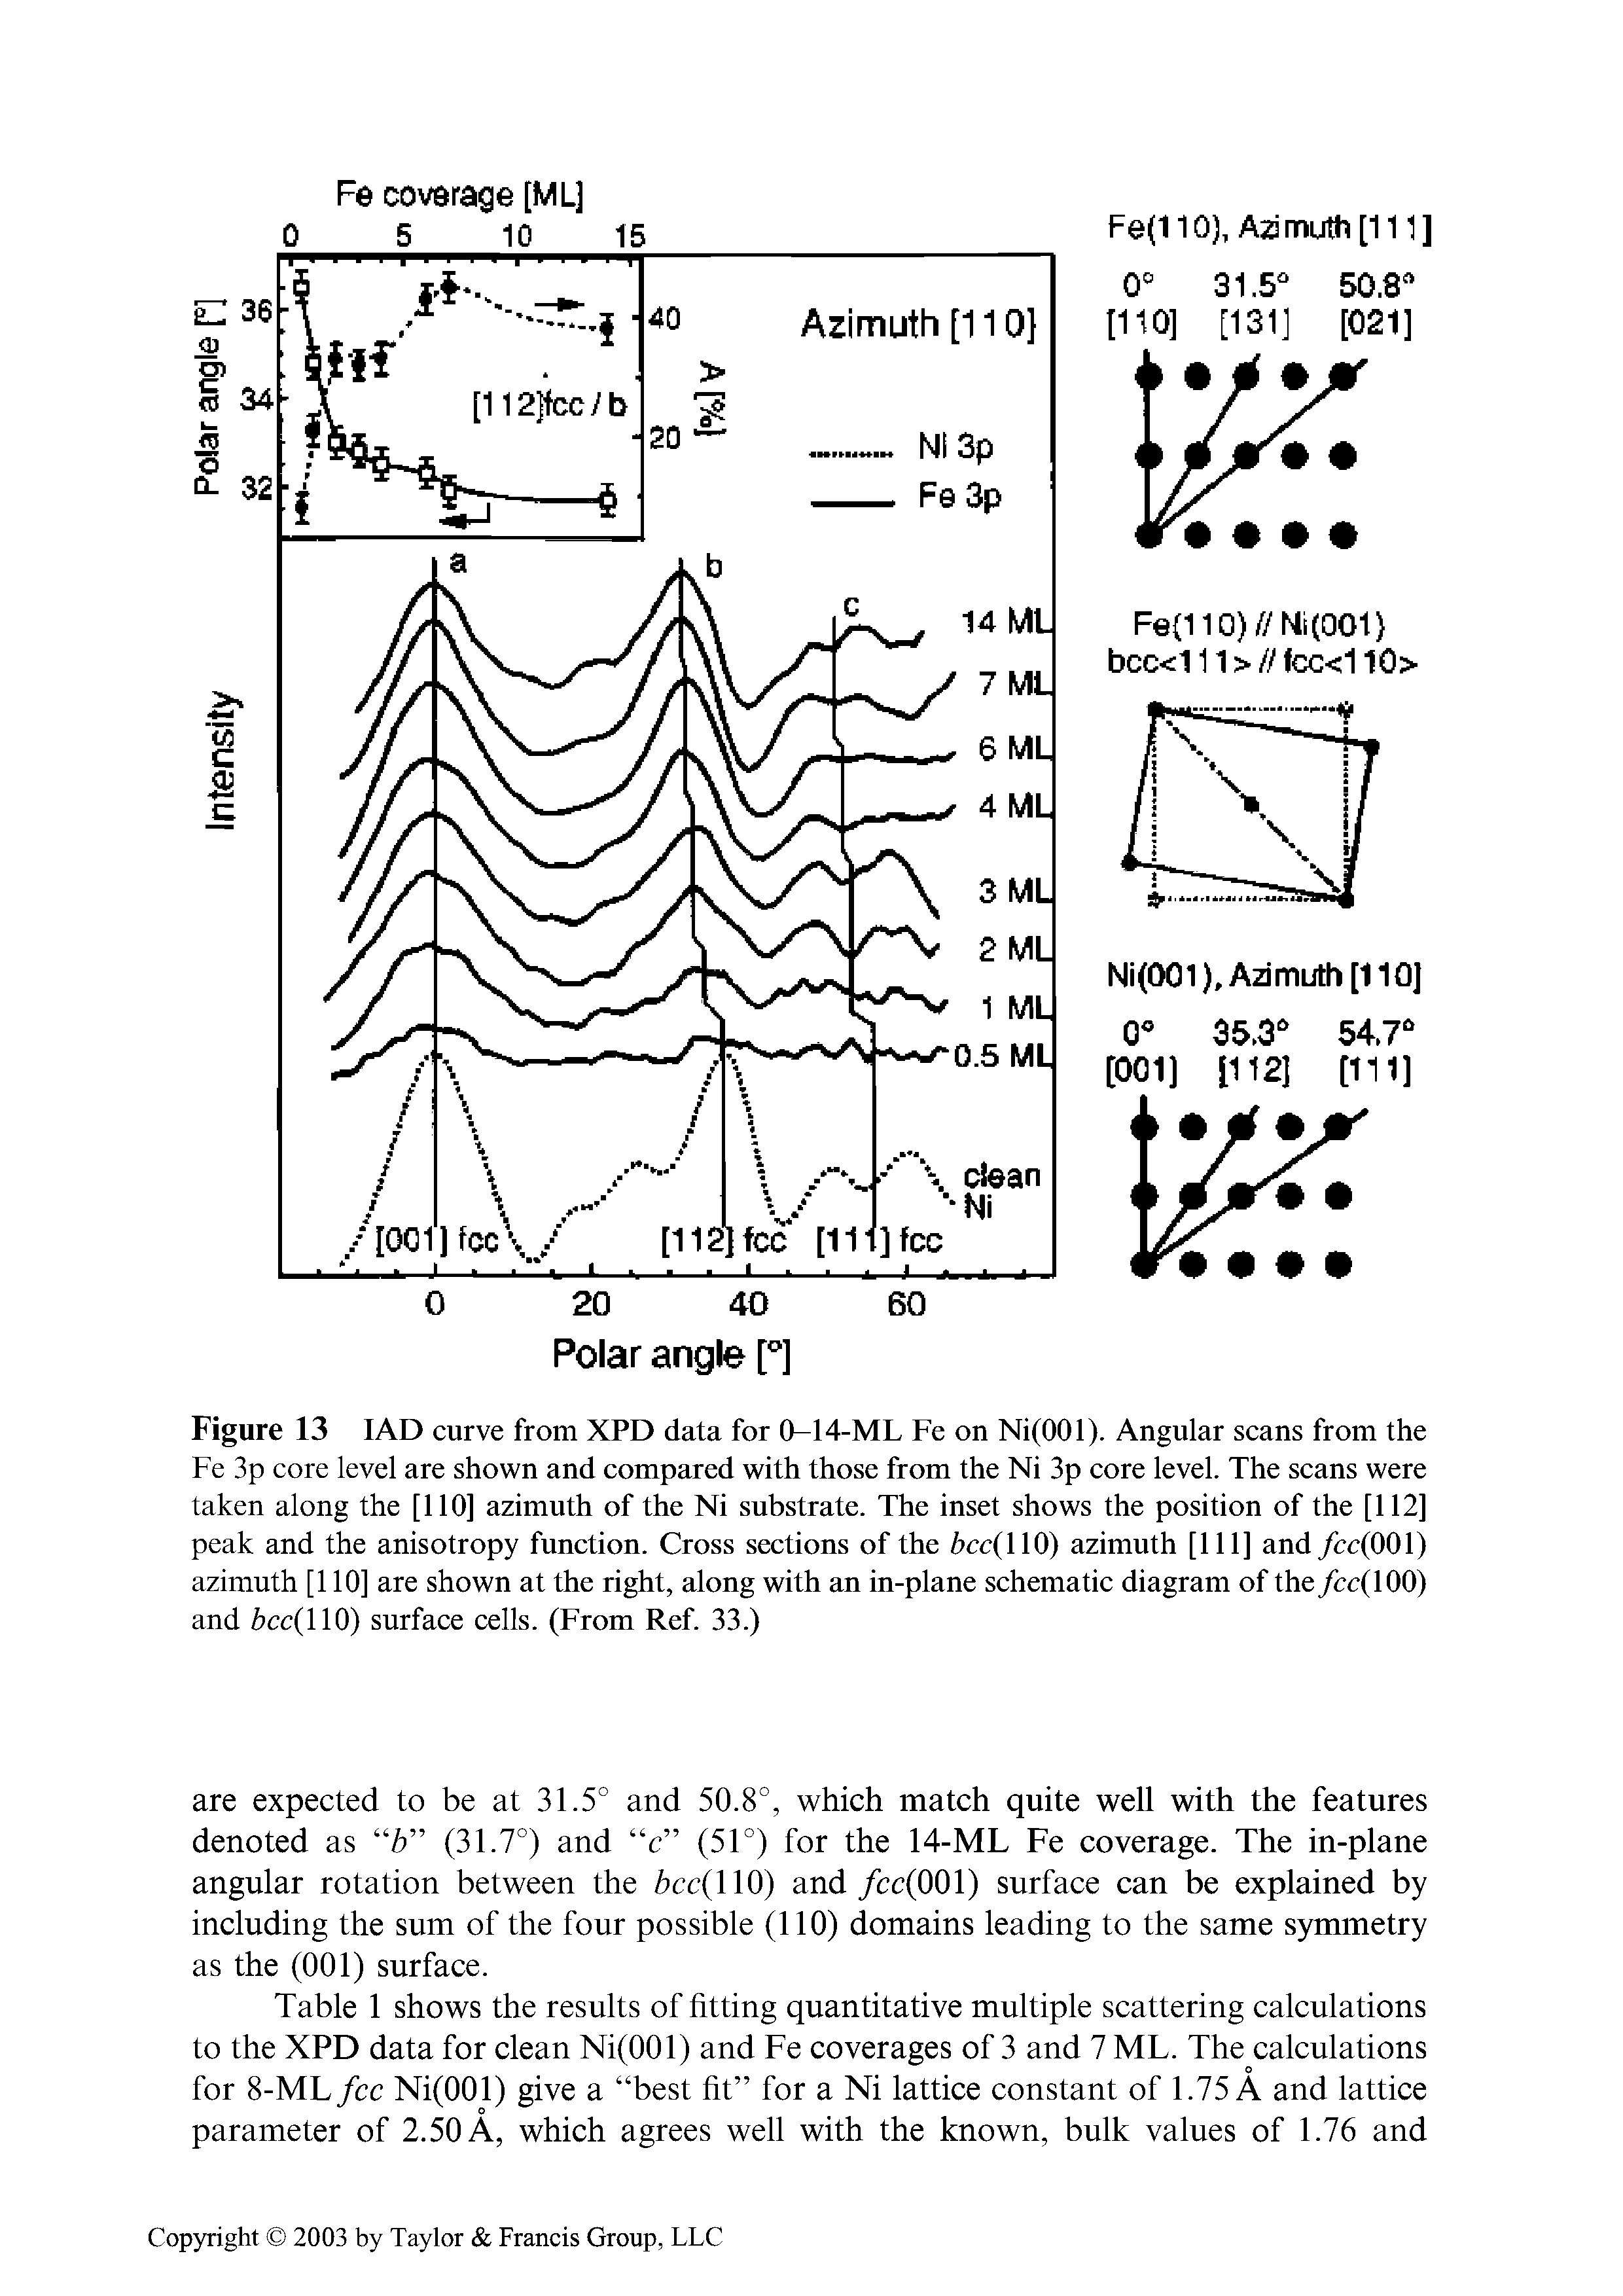 Figure 13 I AD curve from XPD data for 0-14-ML Fe on Ni(OOl). Angular scans from the Fe 3p core level are shown and compared with those from the Ni 3p core level. The scans were taken along the [110] azimuth of the Ni substrate. The inset shows the position of the [112] peak and the anisotropy function. Cross sections of the bcc 0) azimuth [111] and /cc(OOl) azimuth [110] are shown at the right, along with an in-plane schematic diagram of the /cc(lOO) and cc(llO) surface cells. (From Ref. 33.)...